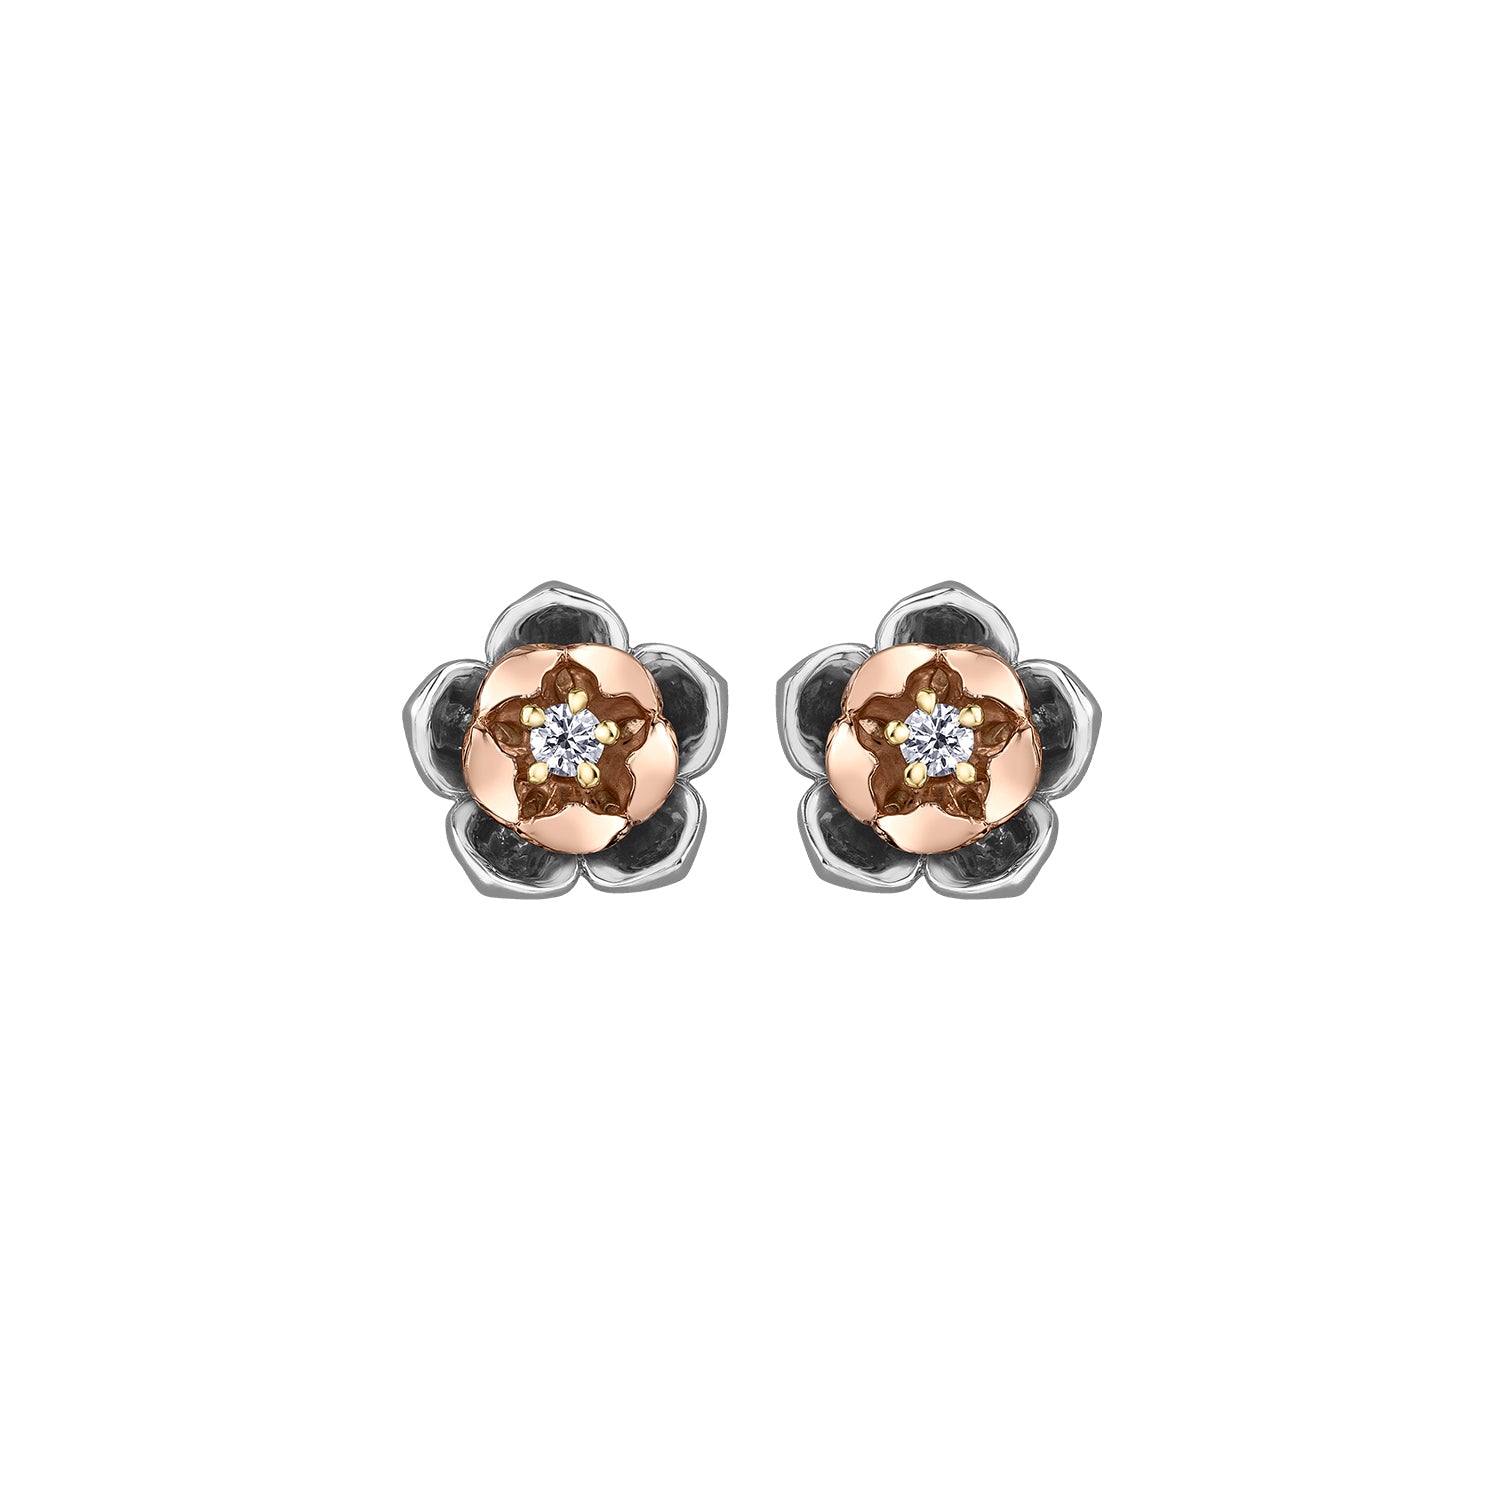 Crafted in 14KT rose and white Certified Canadian Gold, these earrings feature Newfoundland & Labrador pitcher plant flowers set with round brilliant-cut Canadian diamonds